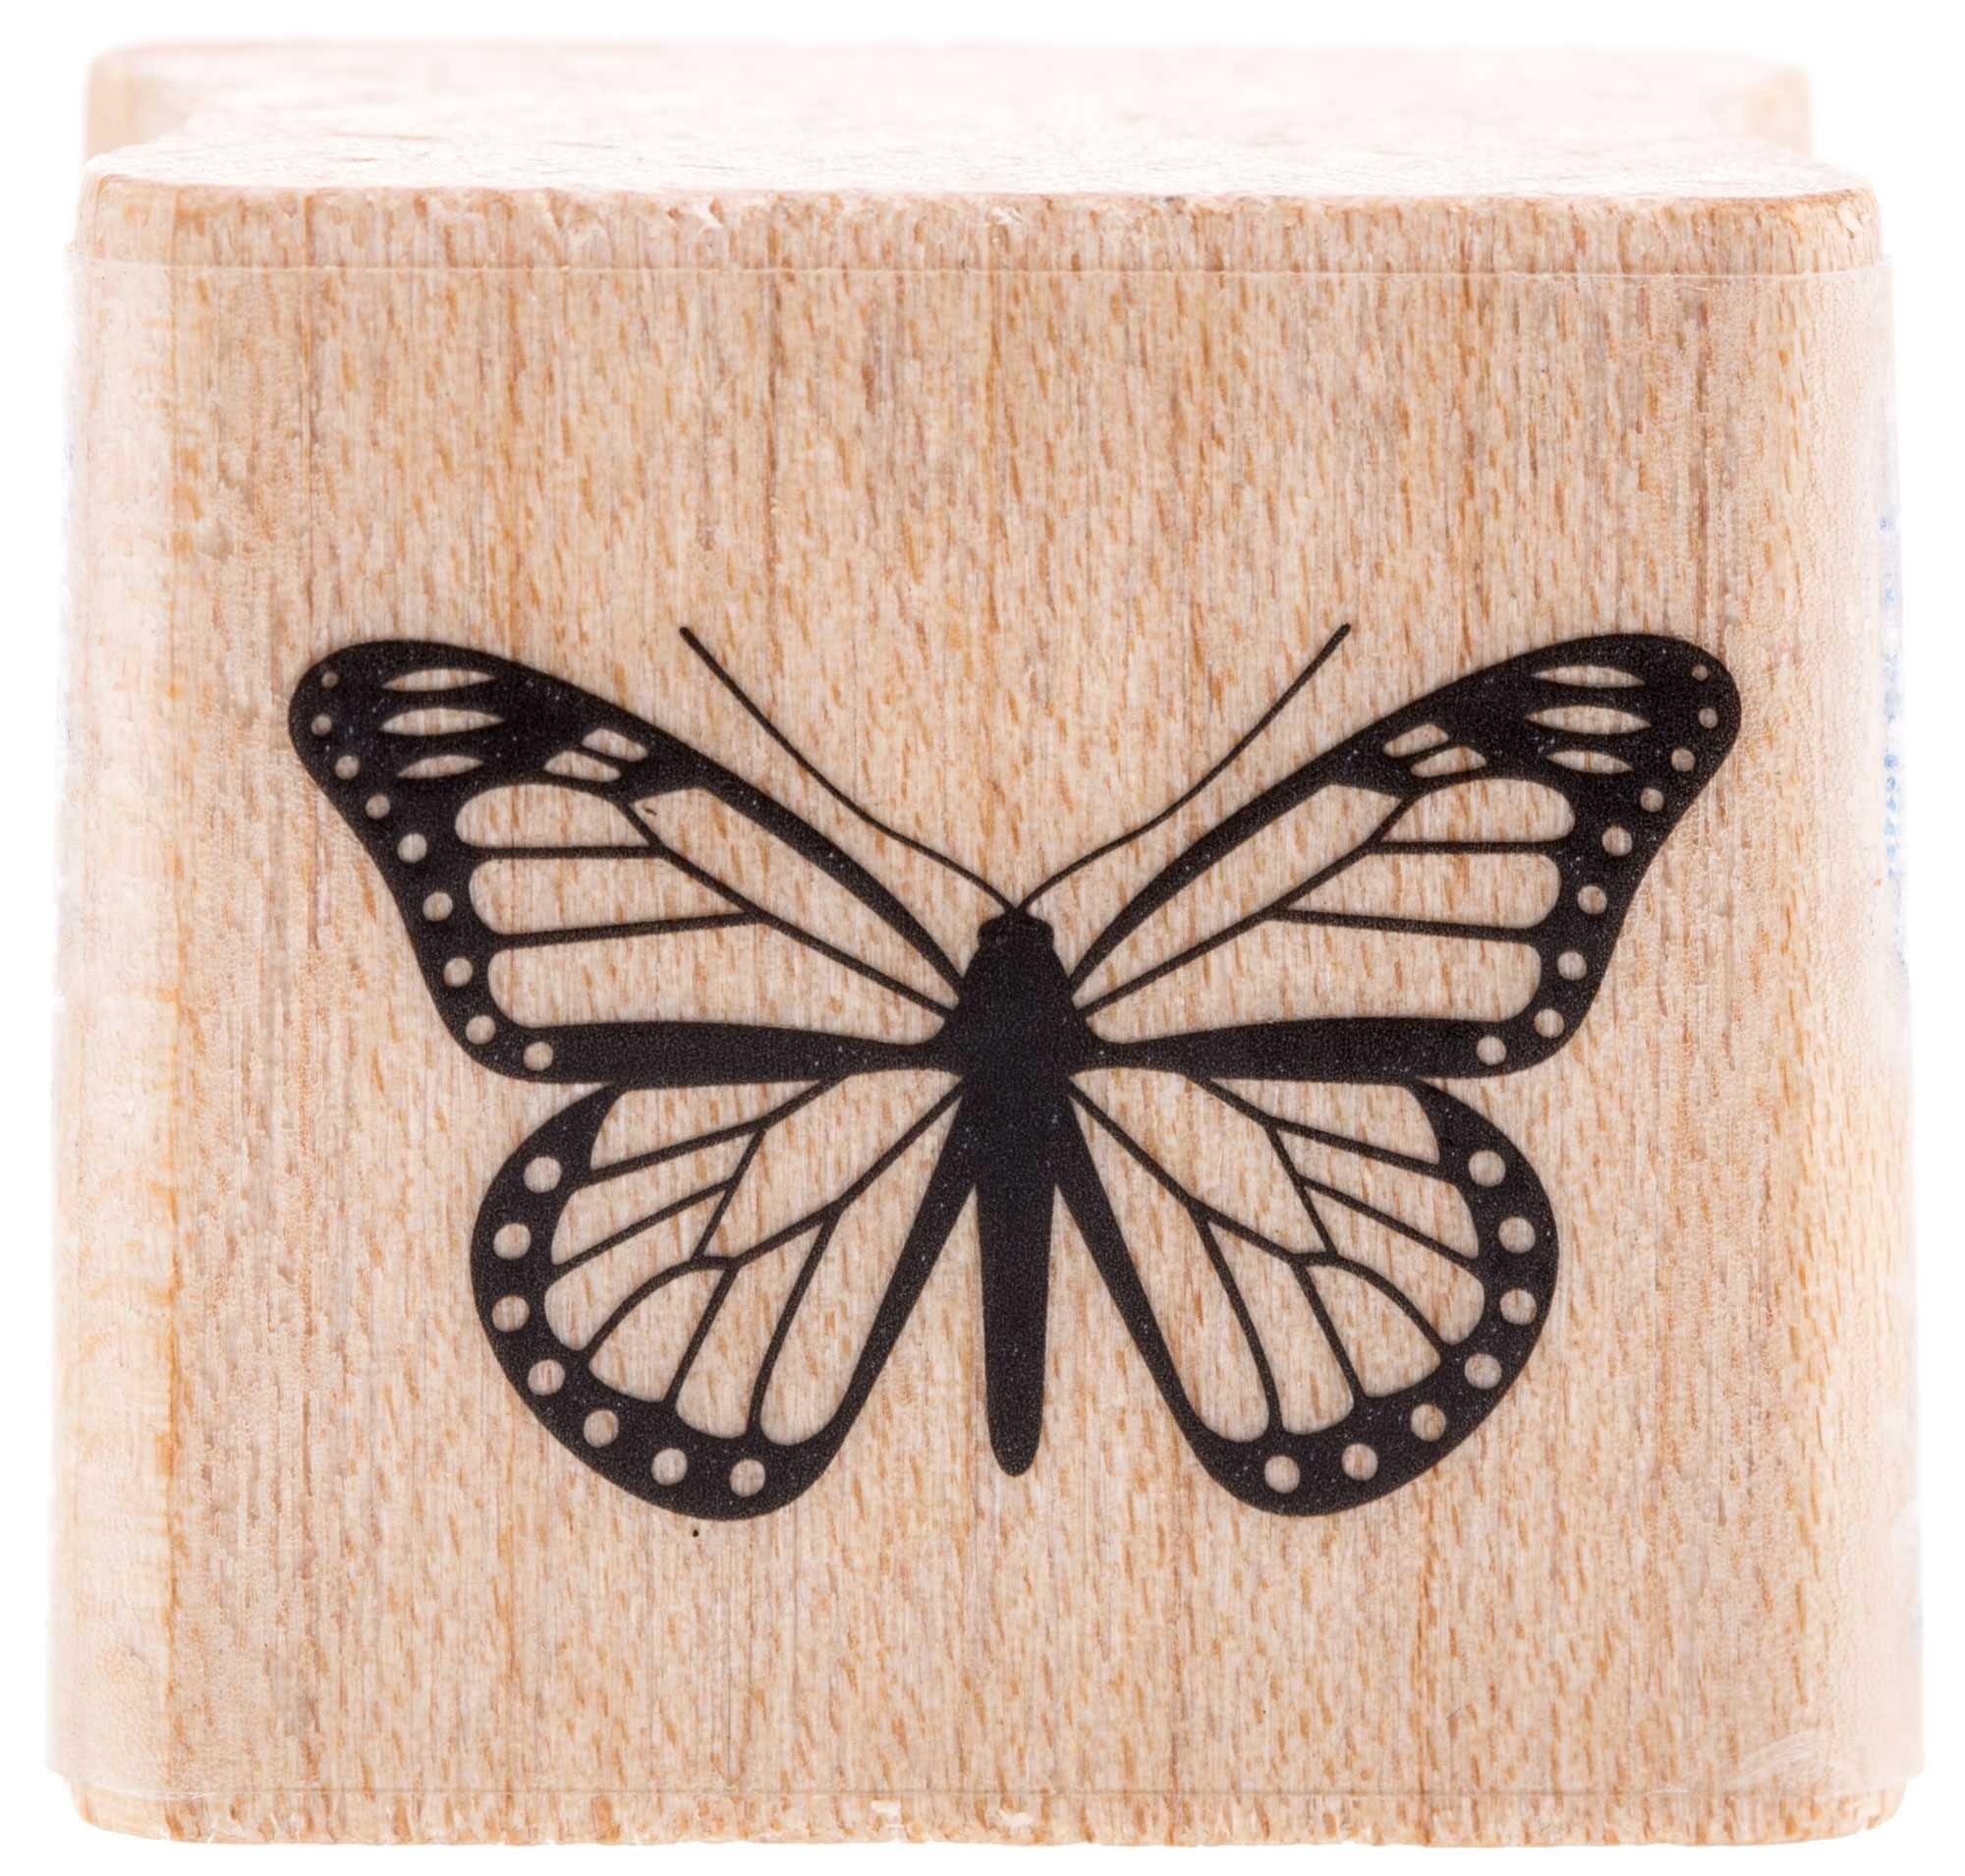 Tiny Flower Rubber Stamps, Butterfly Rubber Stamps and Bird Stamps